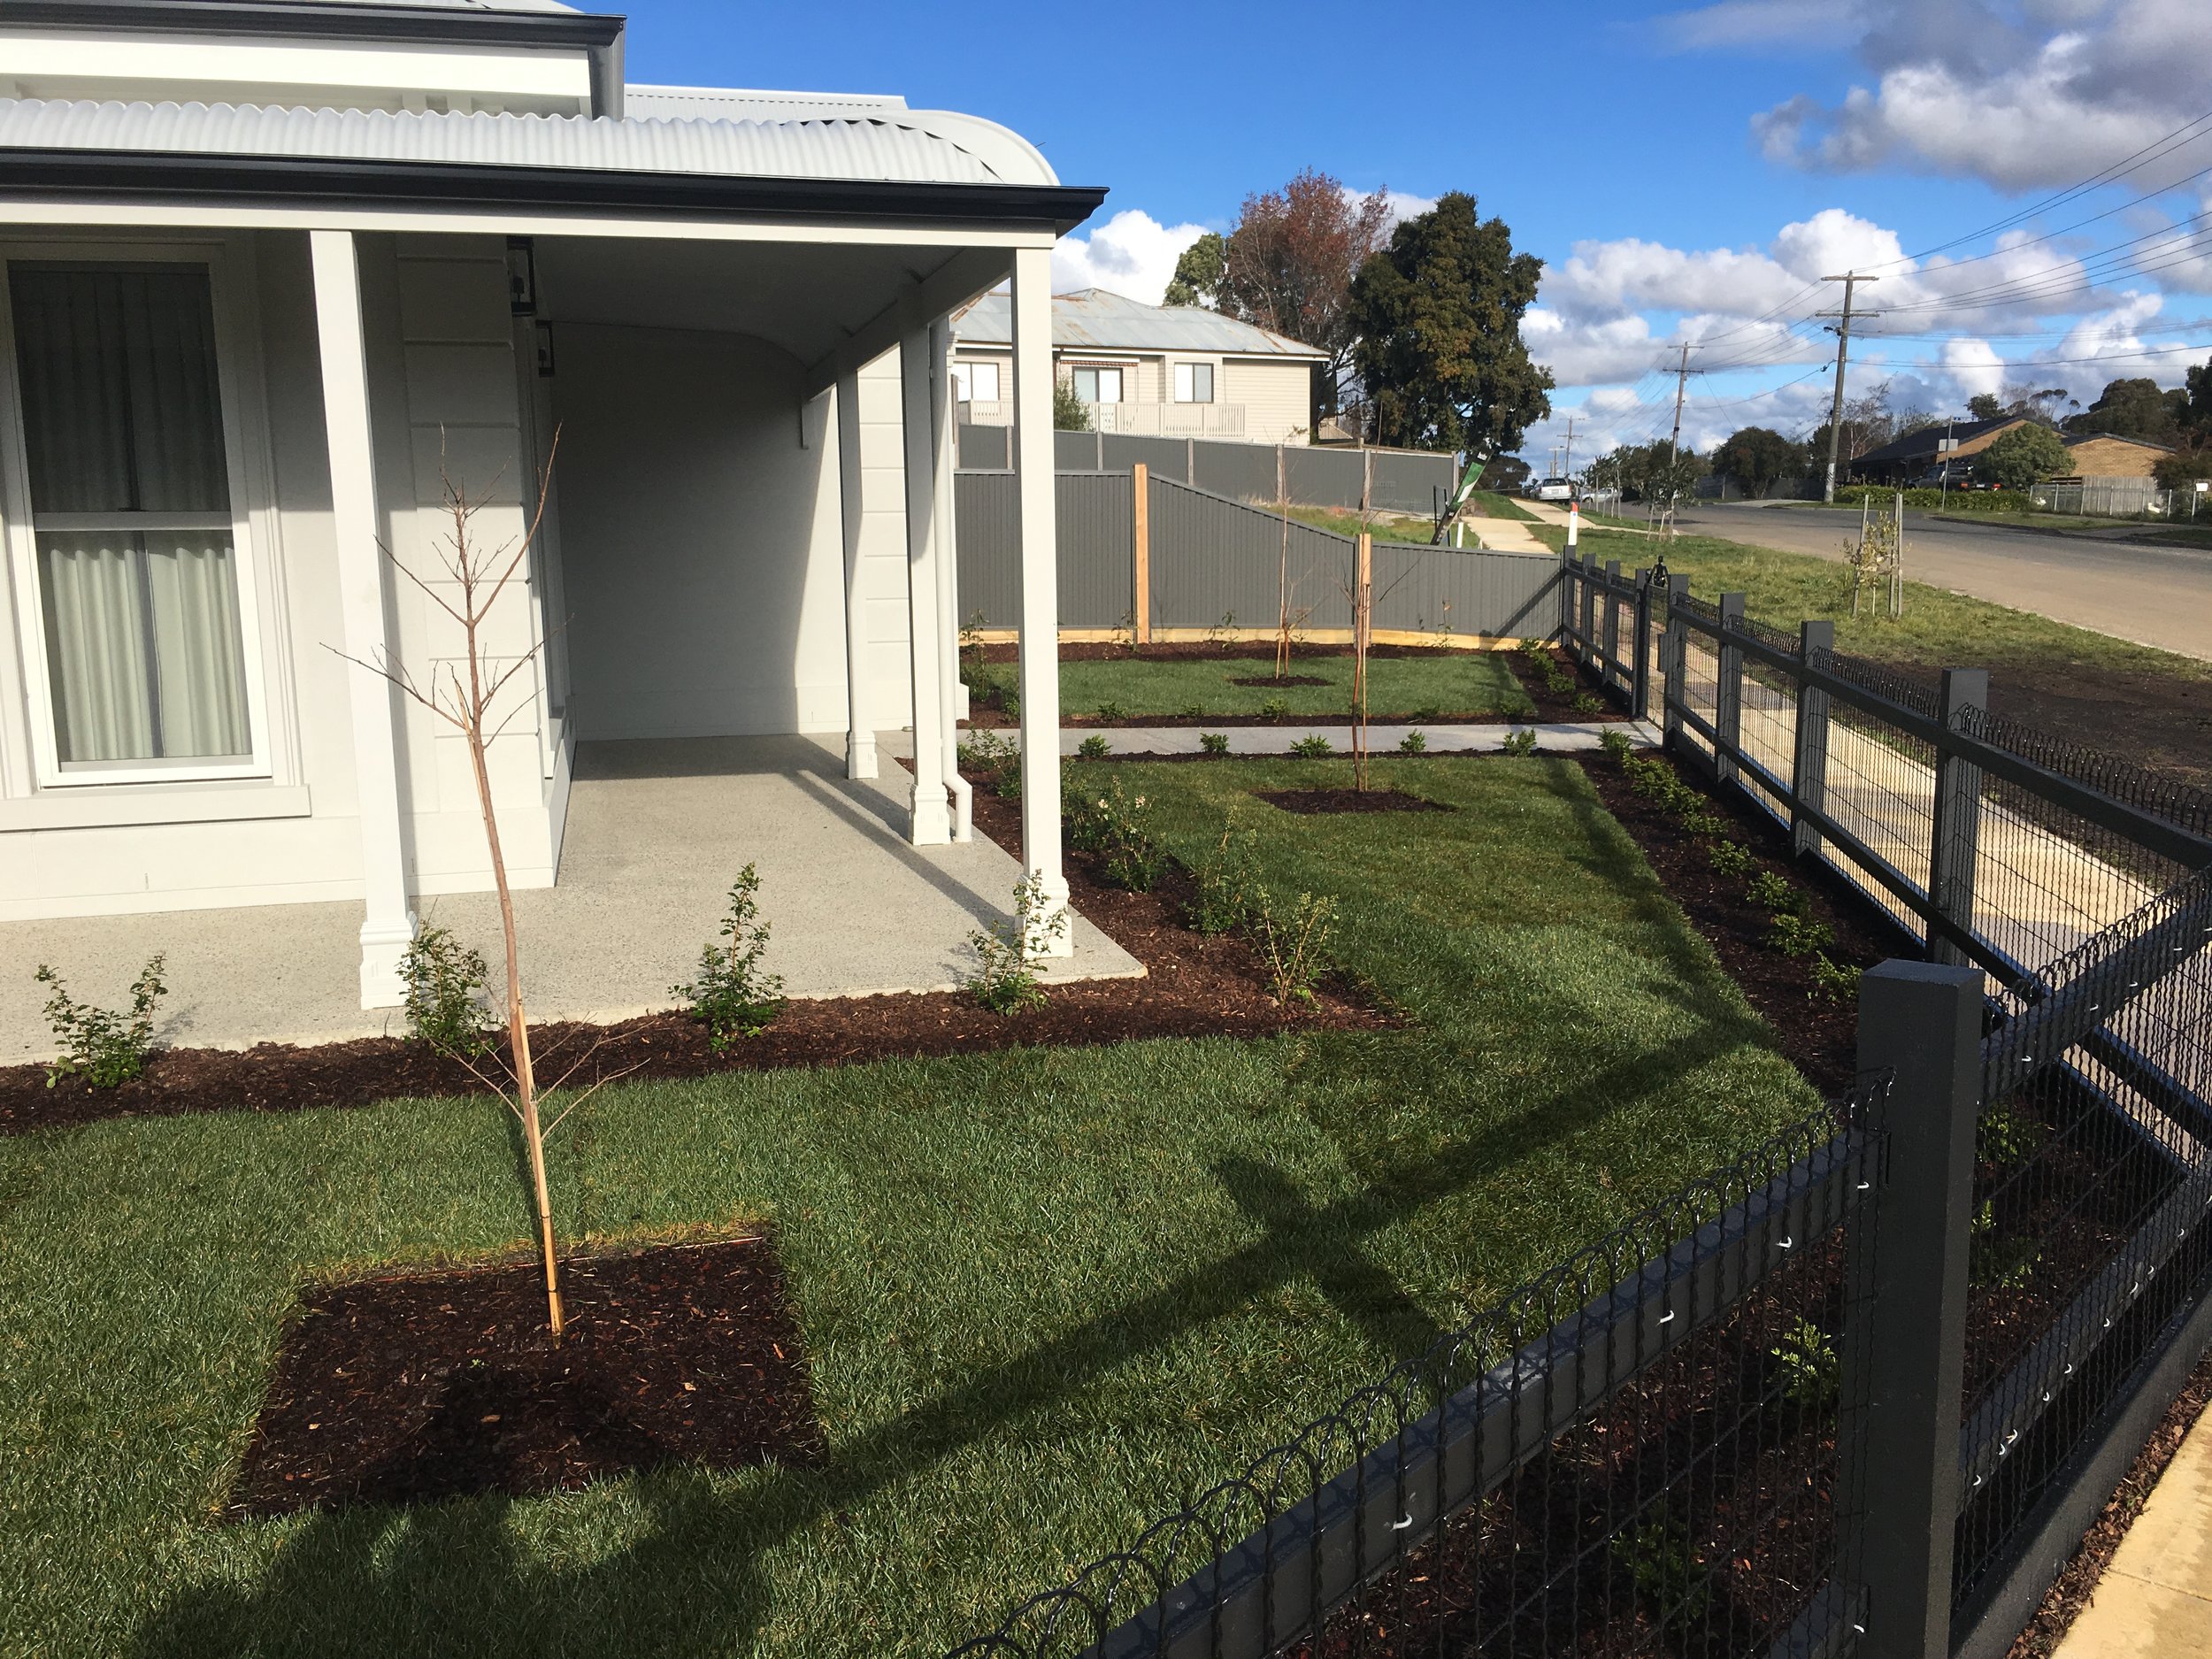 Instant turf, garden beds and feature trees